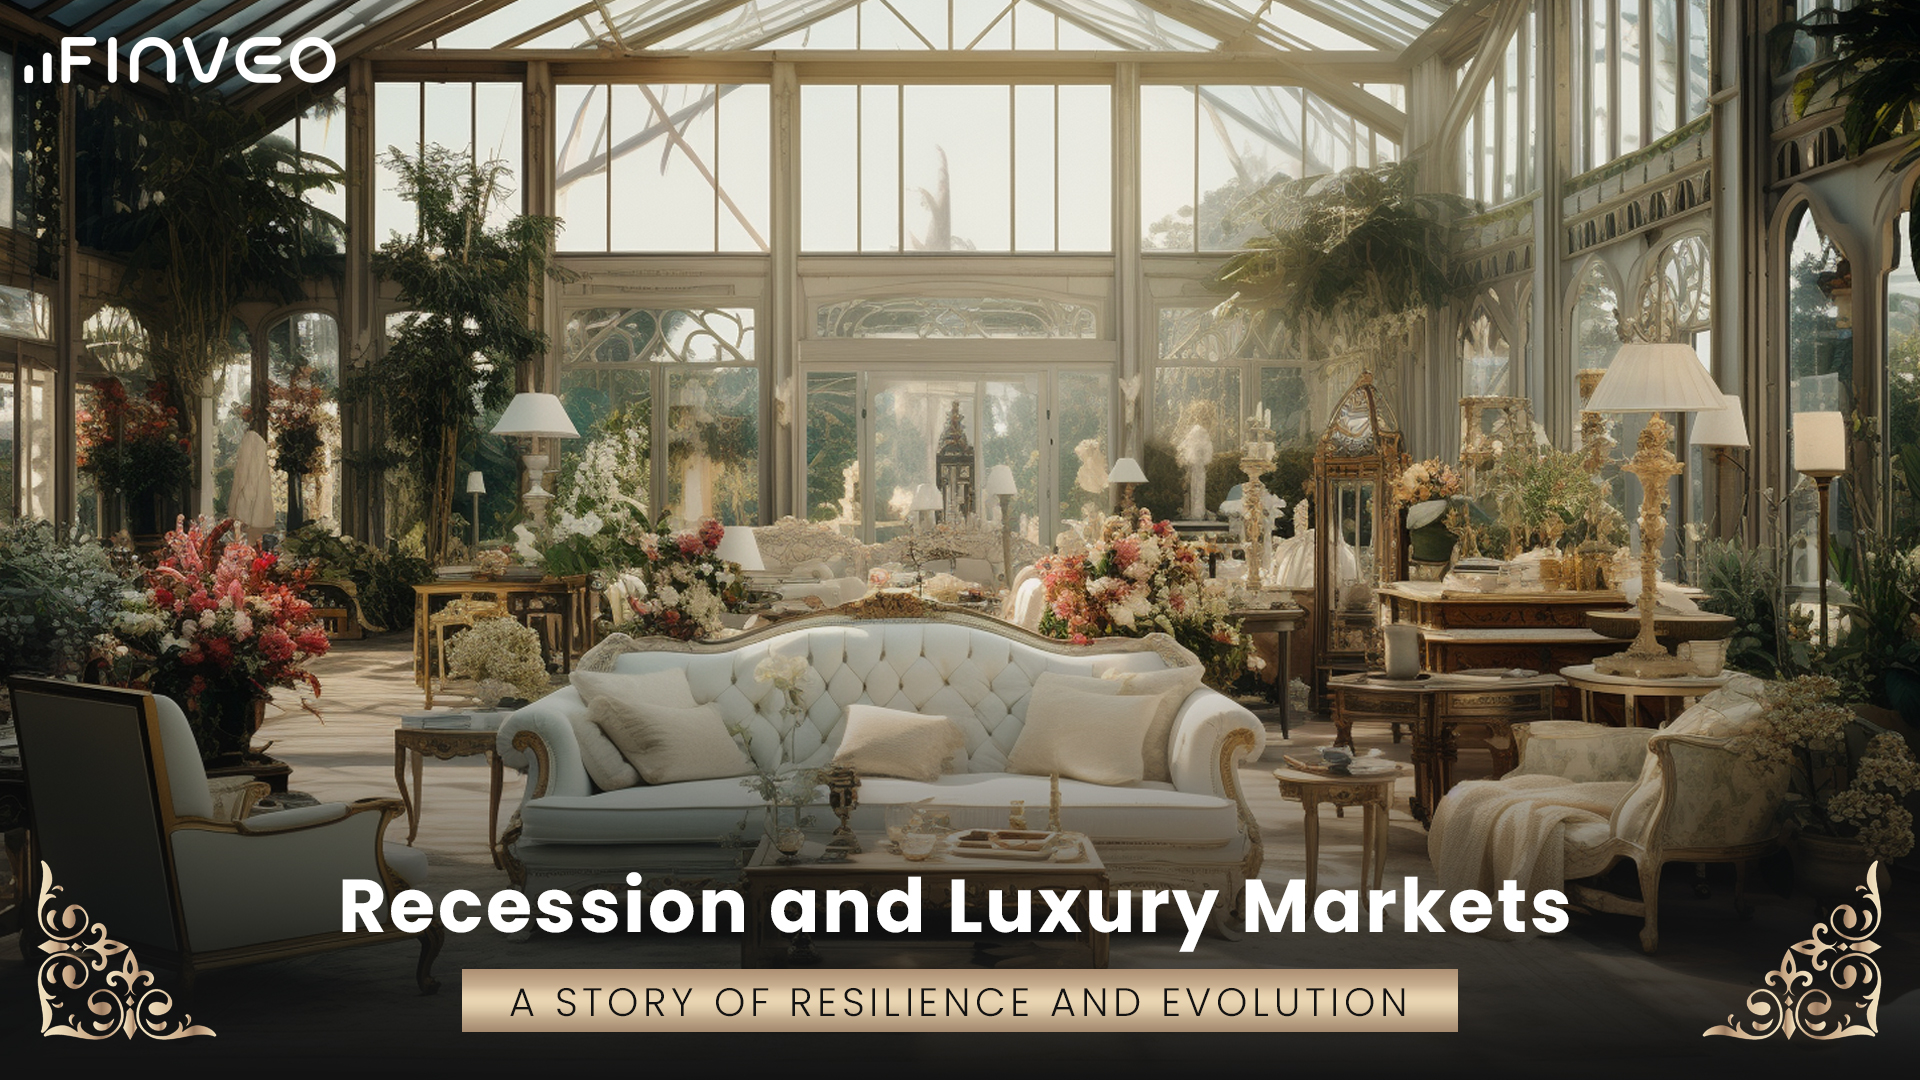 Recession and Luxury Markets: A story of Resilience and Evolution